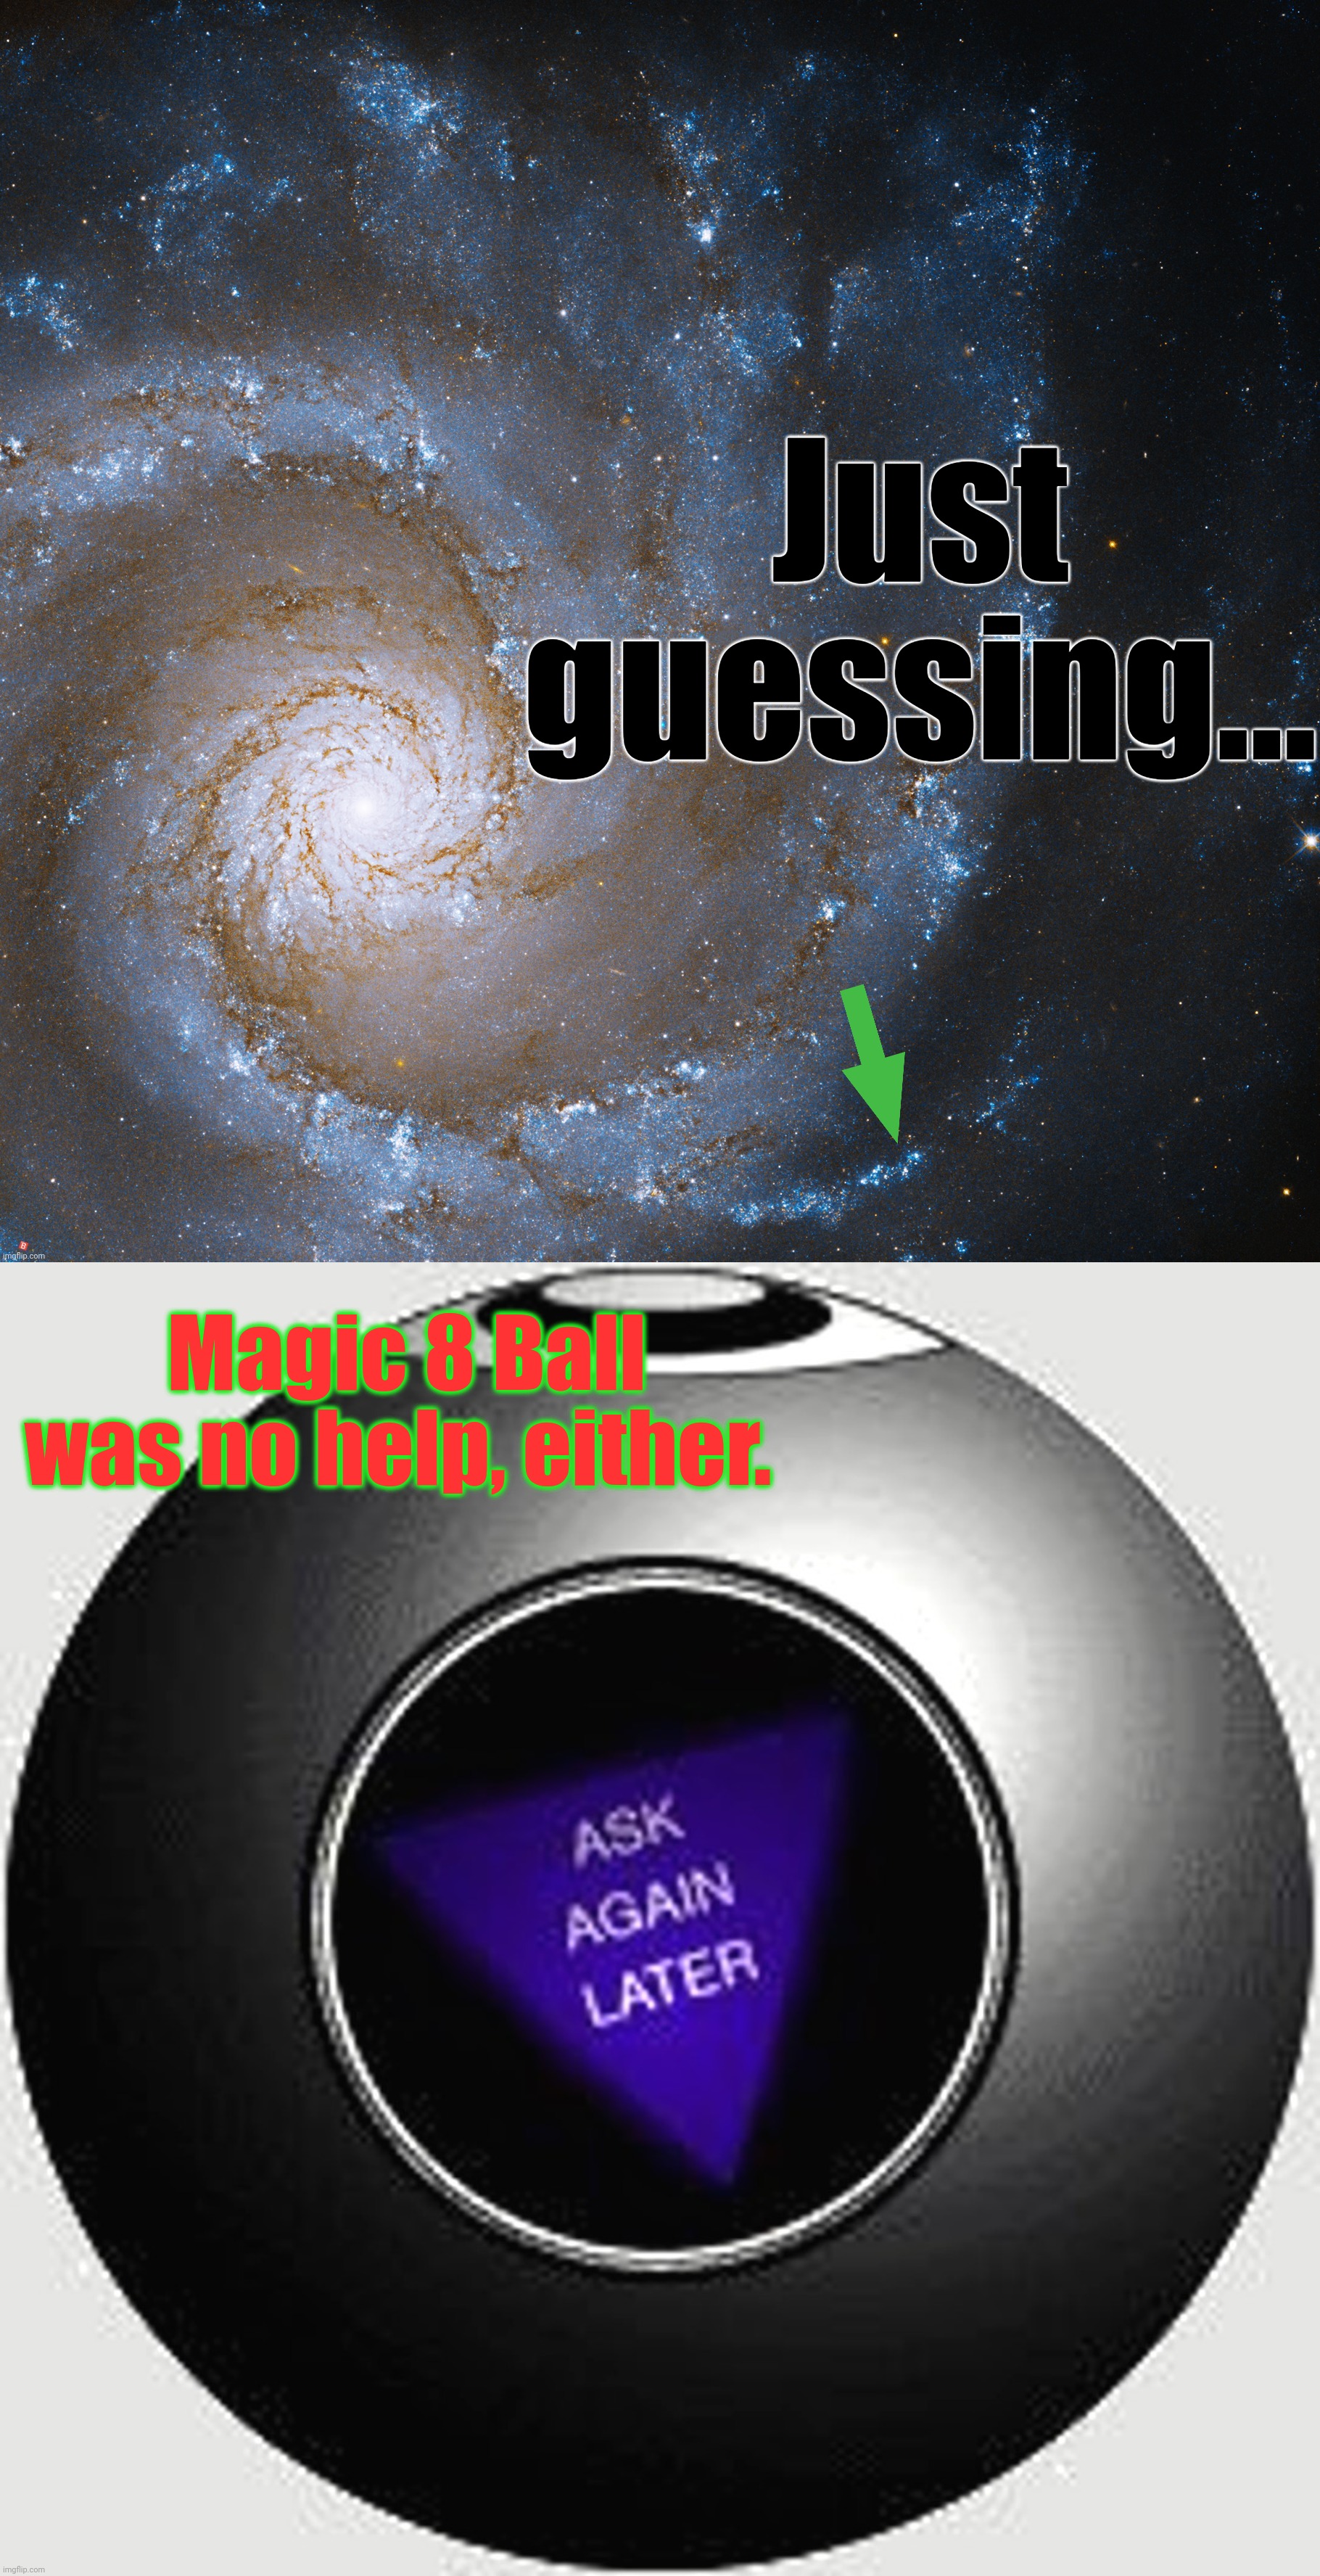 Just guessing... Magic 8 Ball was no help, either. | made w/ Imgflip meme maker